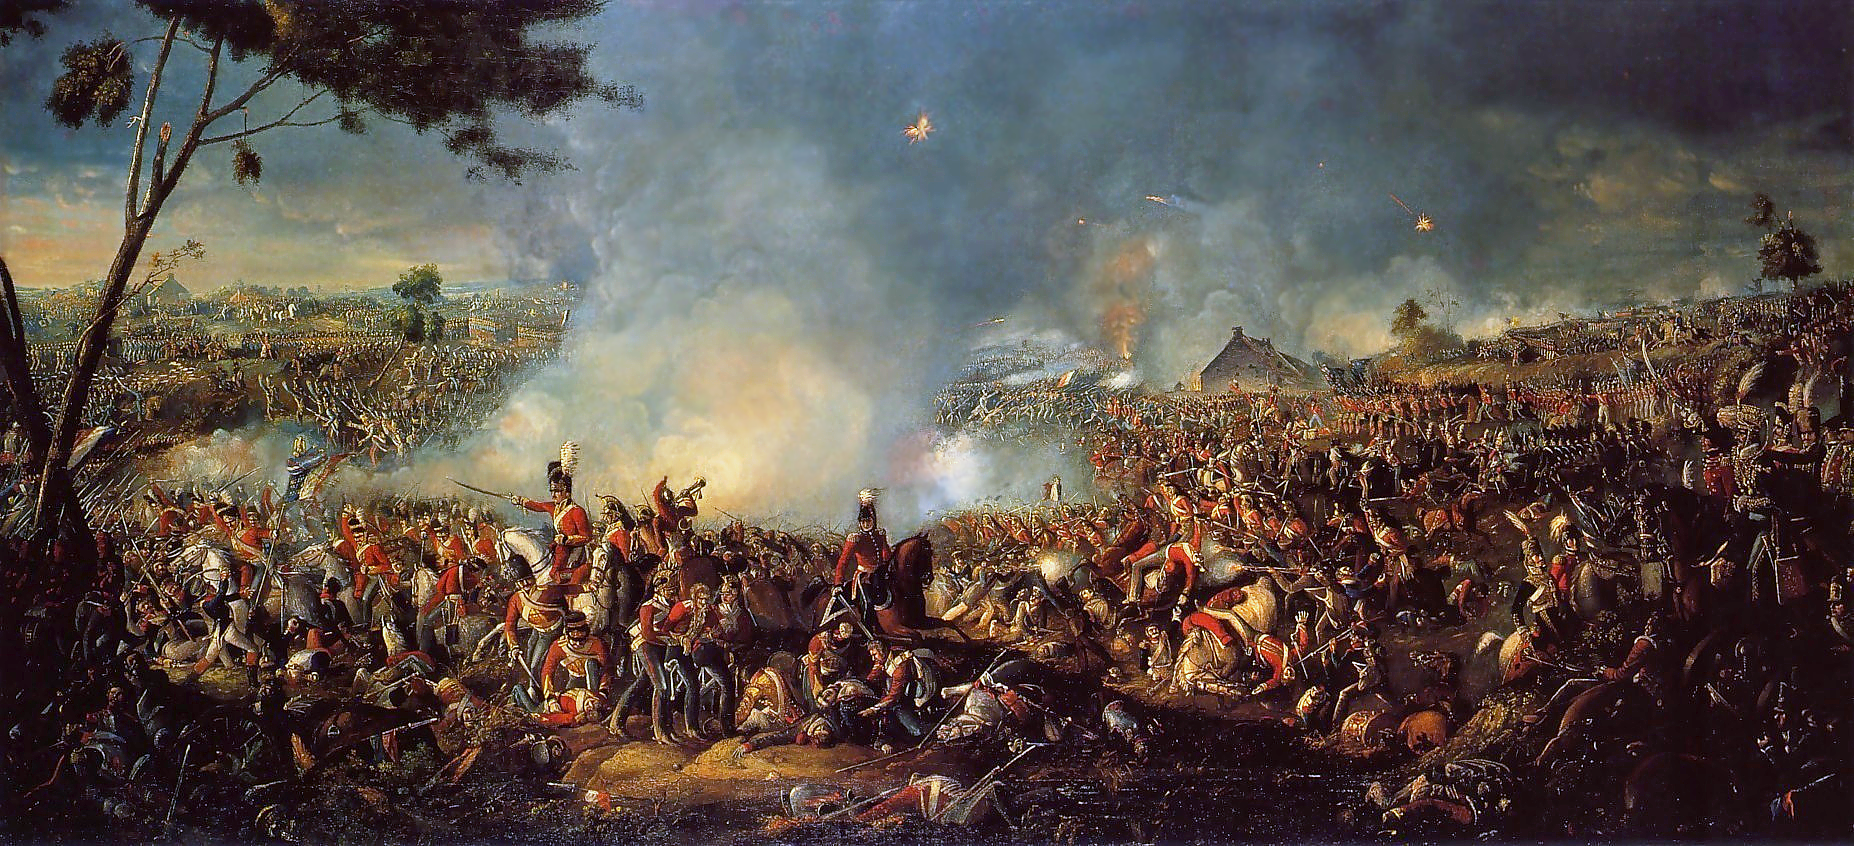 18 June 1815 – What If Part II